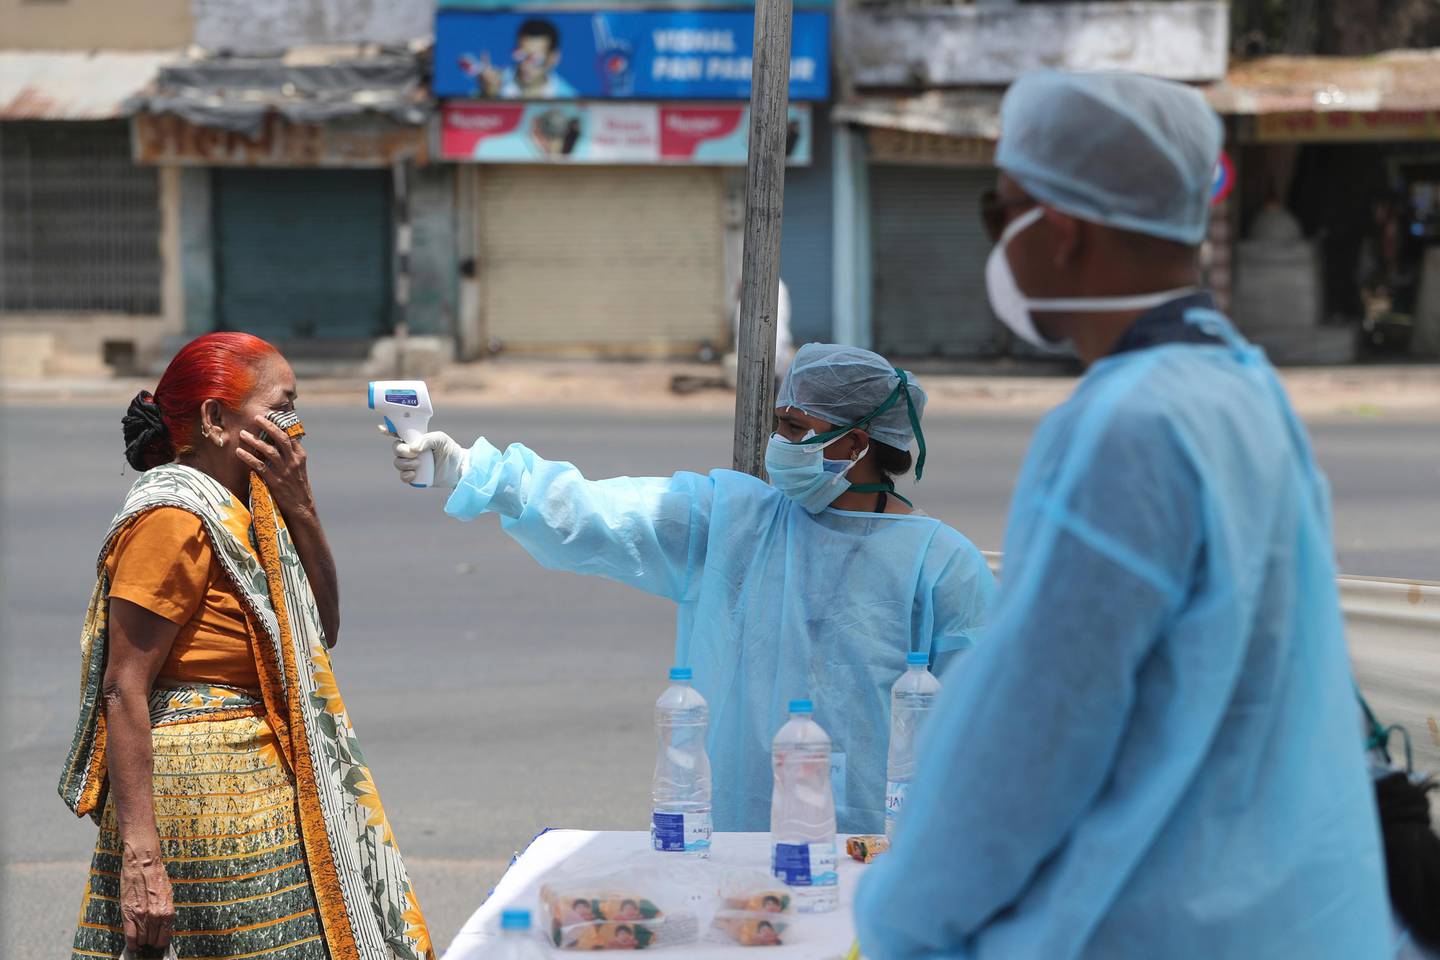 An Indian health worker checks the temperature of a woman during lockdown to prevent the spread of new coronavirus in Ahmedabad, India, Wednesday, April 8, 2020. The new coronavirus causes mild or moderate symptoms for most people, but for some, especially older adults and people with existing health problems, it can cause more severe illness or death. (AP Photo/Ajit Solanki)